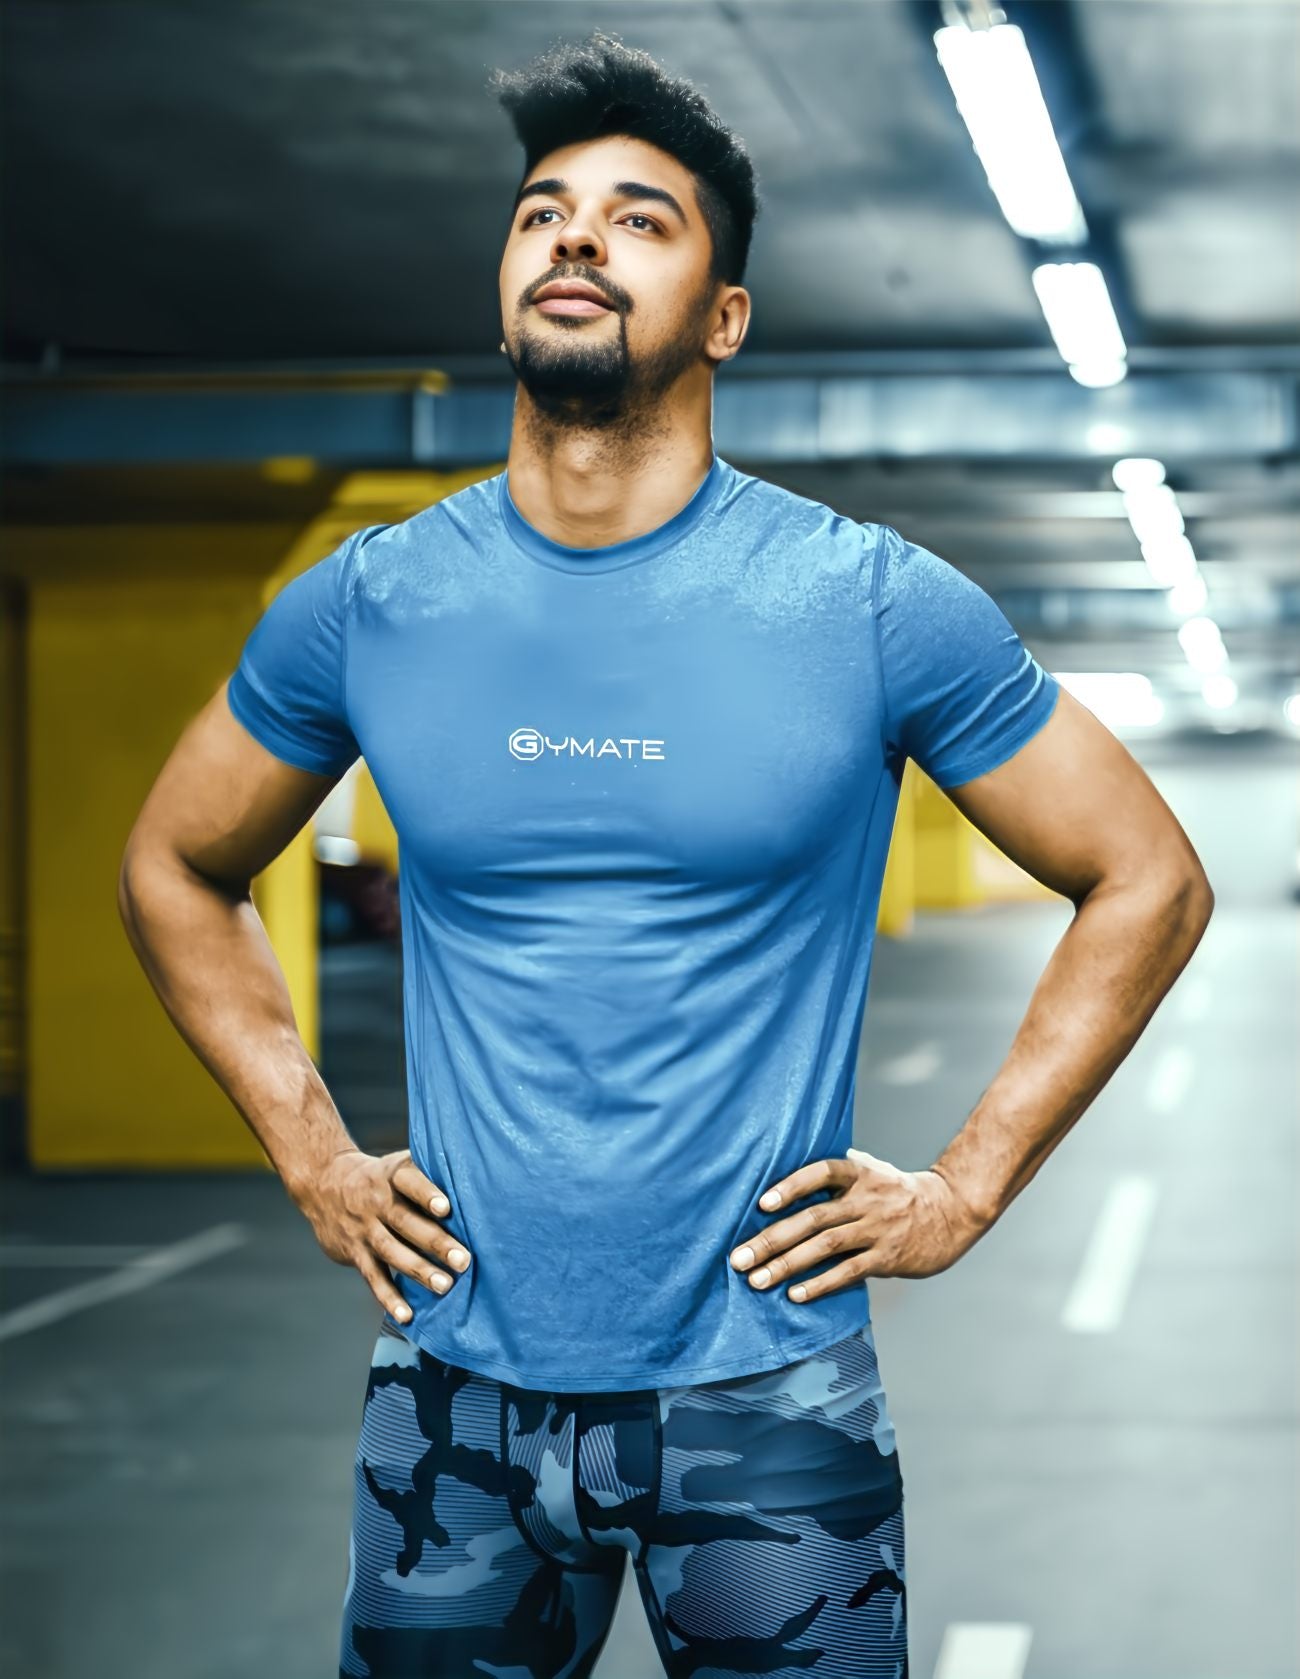 Performance Activewear Recycled gym T-shirts Gymate [sml/ctr] sapphire blue